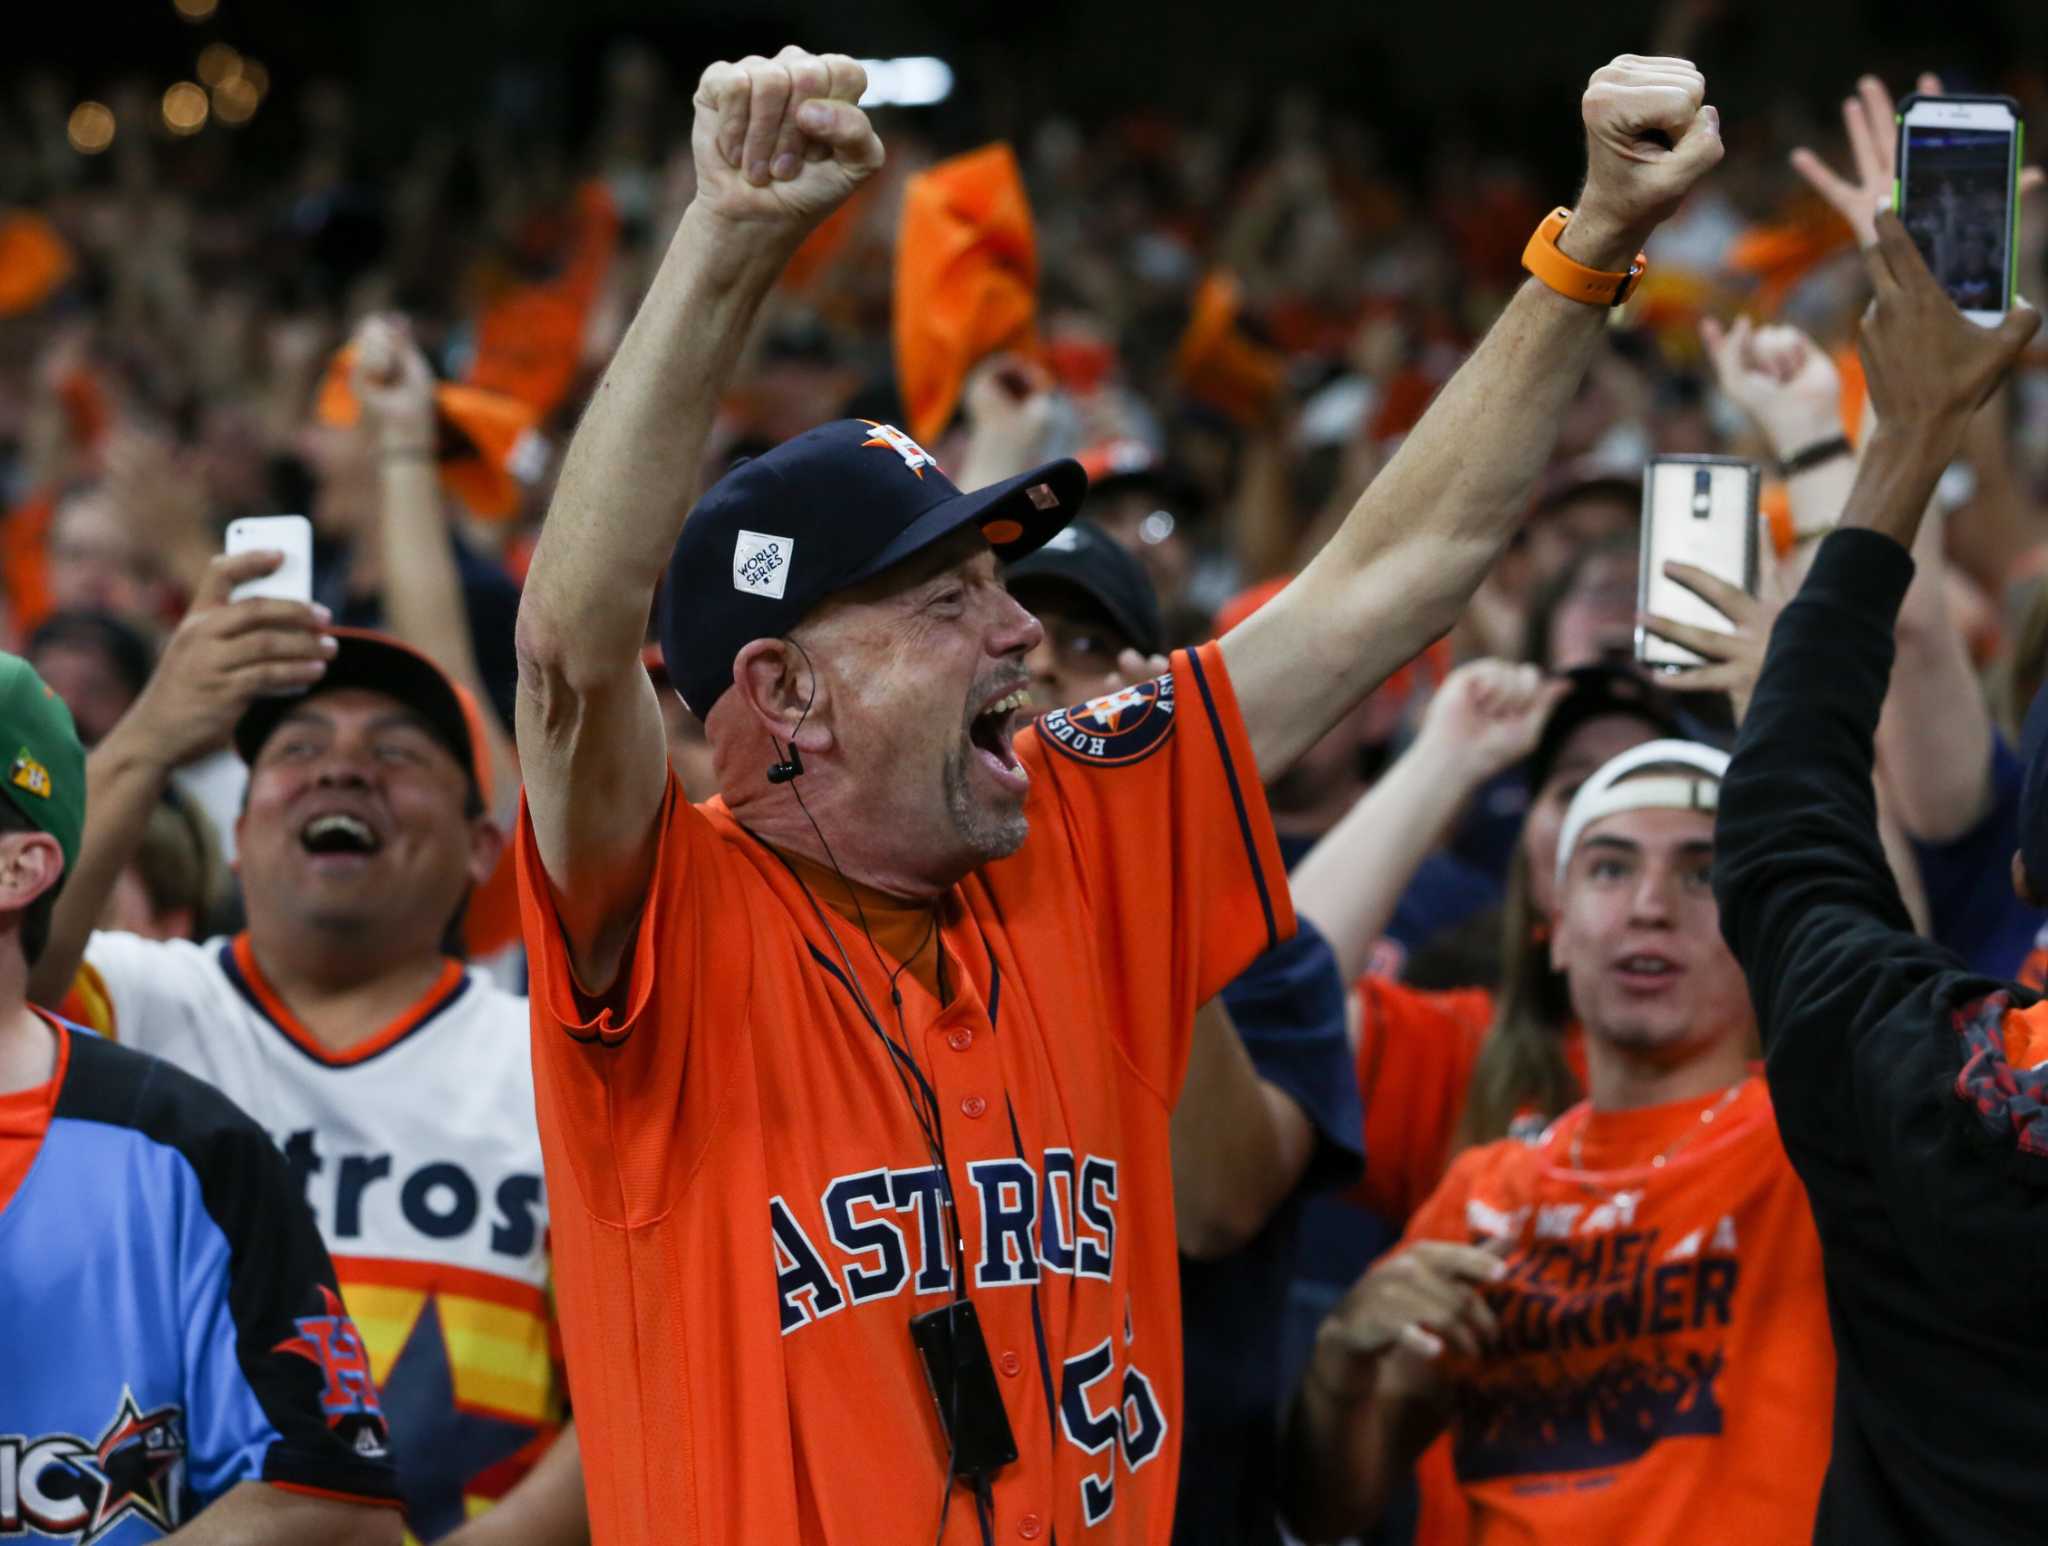 Fans in Conroe line up to collect Astros swag after World Series win